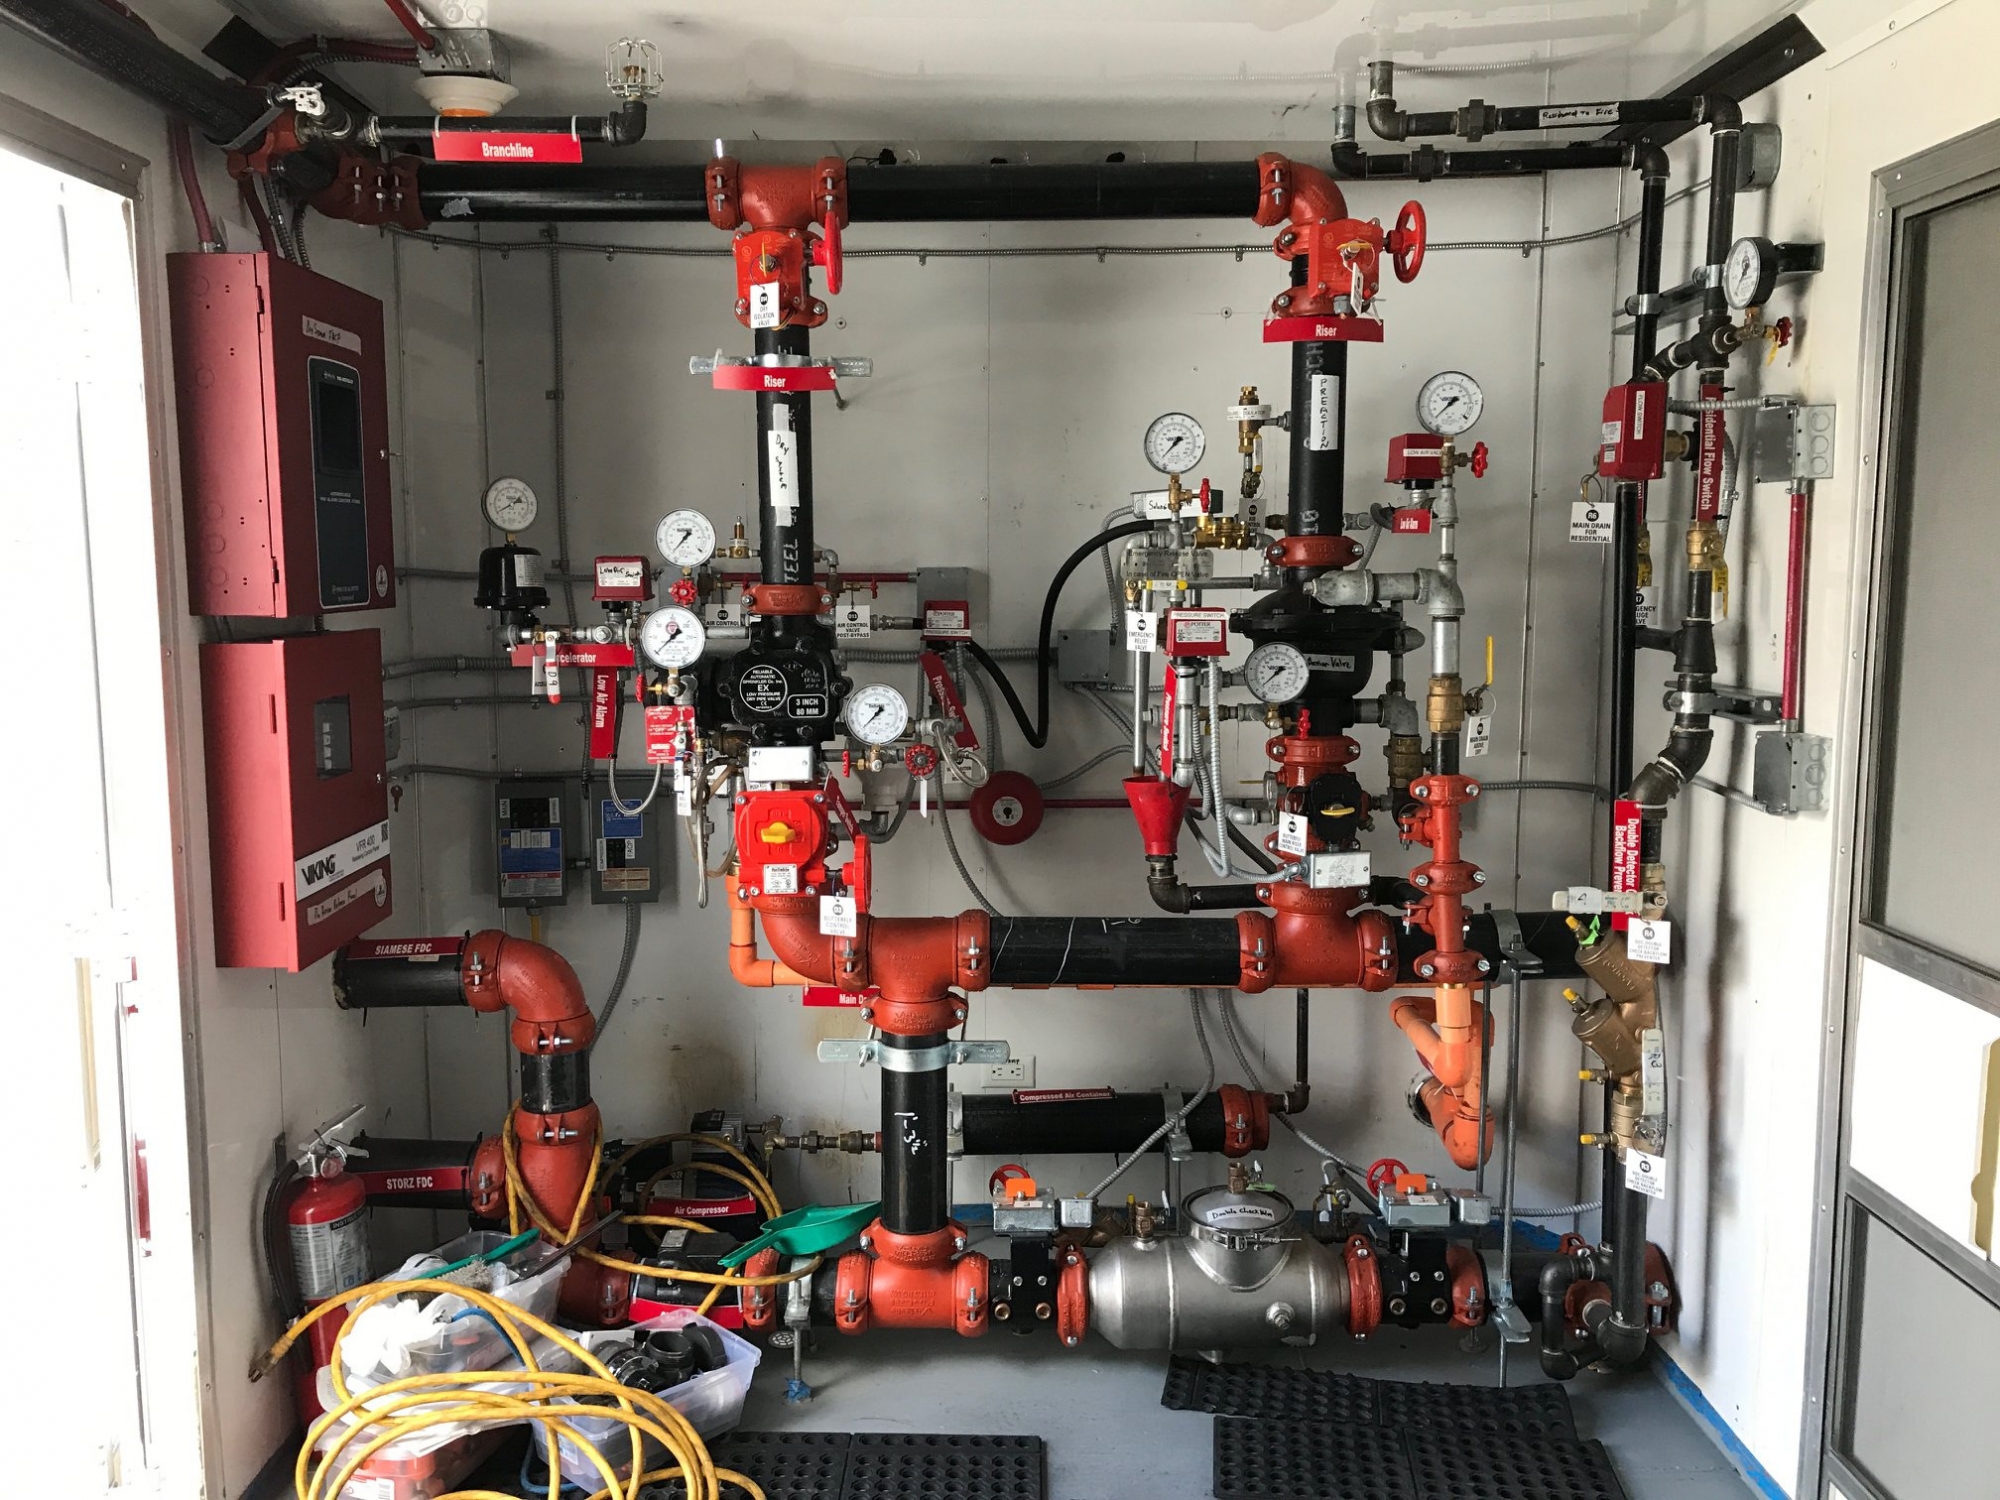 The trailer interior features many types of sprinkler systems that the students will encounter upon entering the profession. It also has a controlled burn room. 